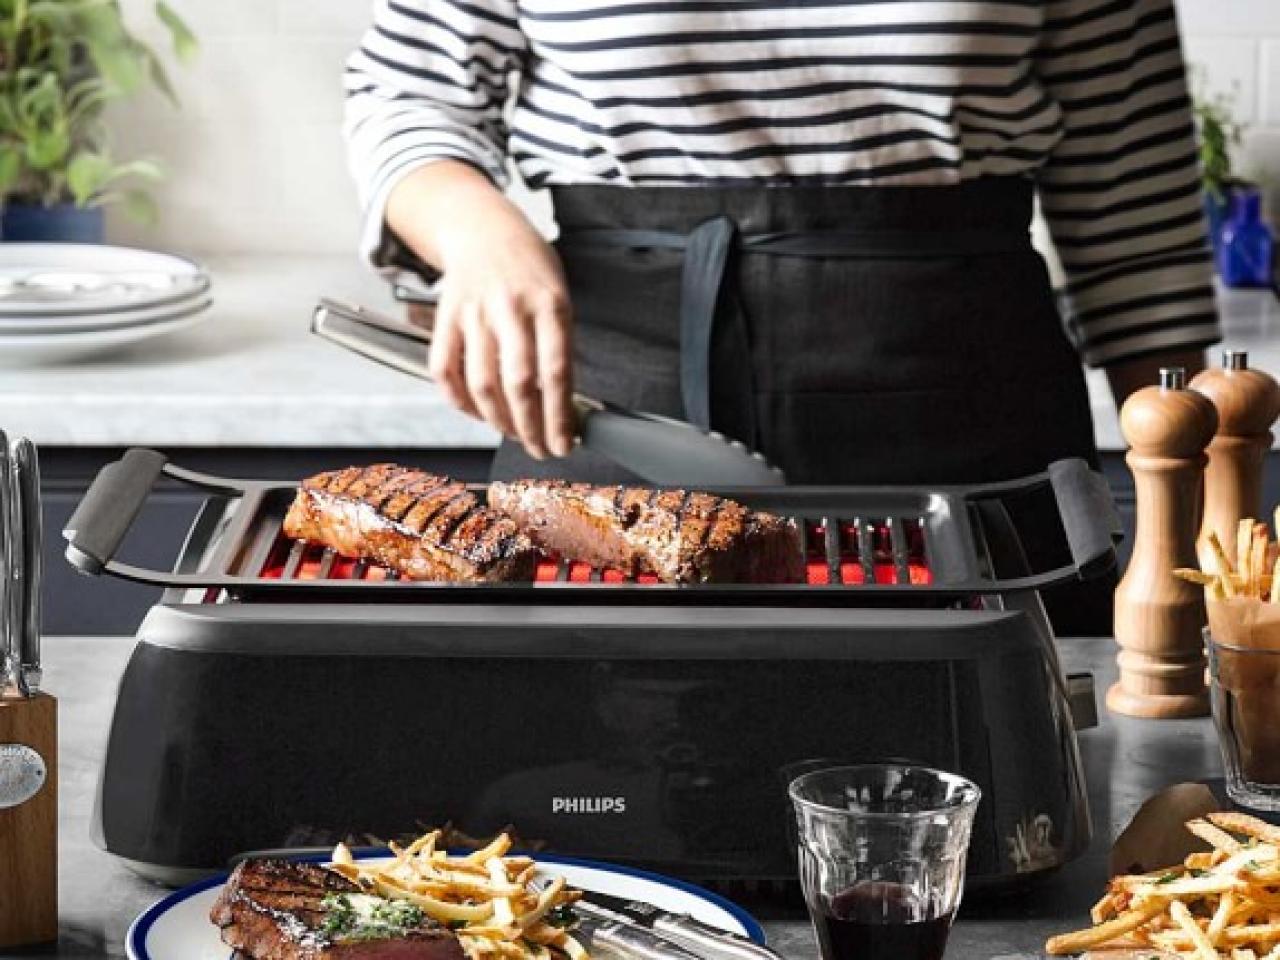 https://food.fnr.sndimg.com/content/dam/images/food/products/2019/5/23/rx_philips-smoke-less-infrared-grill-with-bbq-ampamp-steel-wire-grids.jpeg.rend.hgtvcom.1280.960.suffix/1558627287509.jpeg